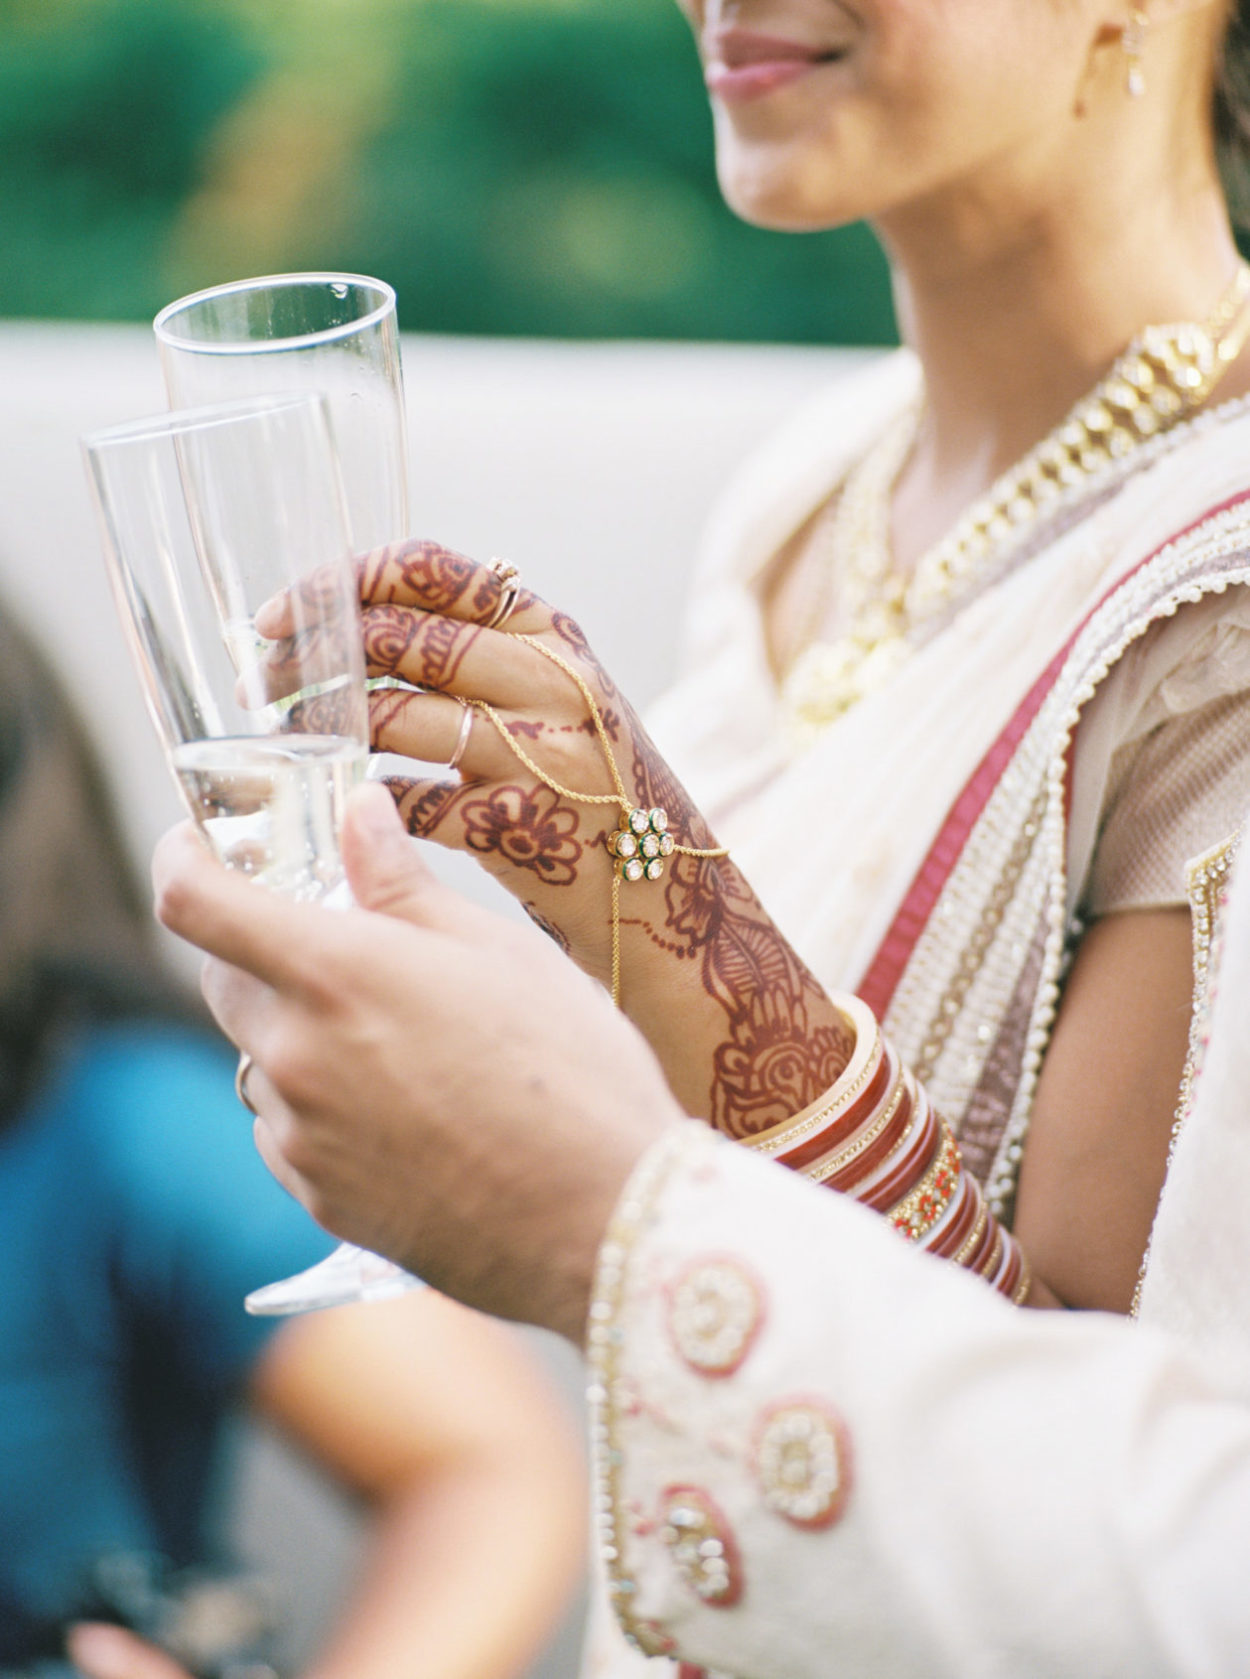 Modern mendhi and hand jewelry at fall Indian wedding reception